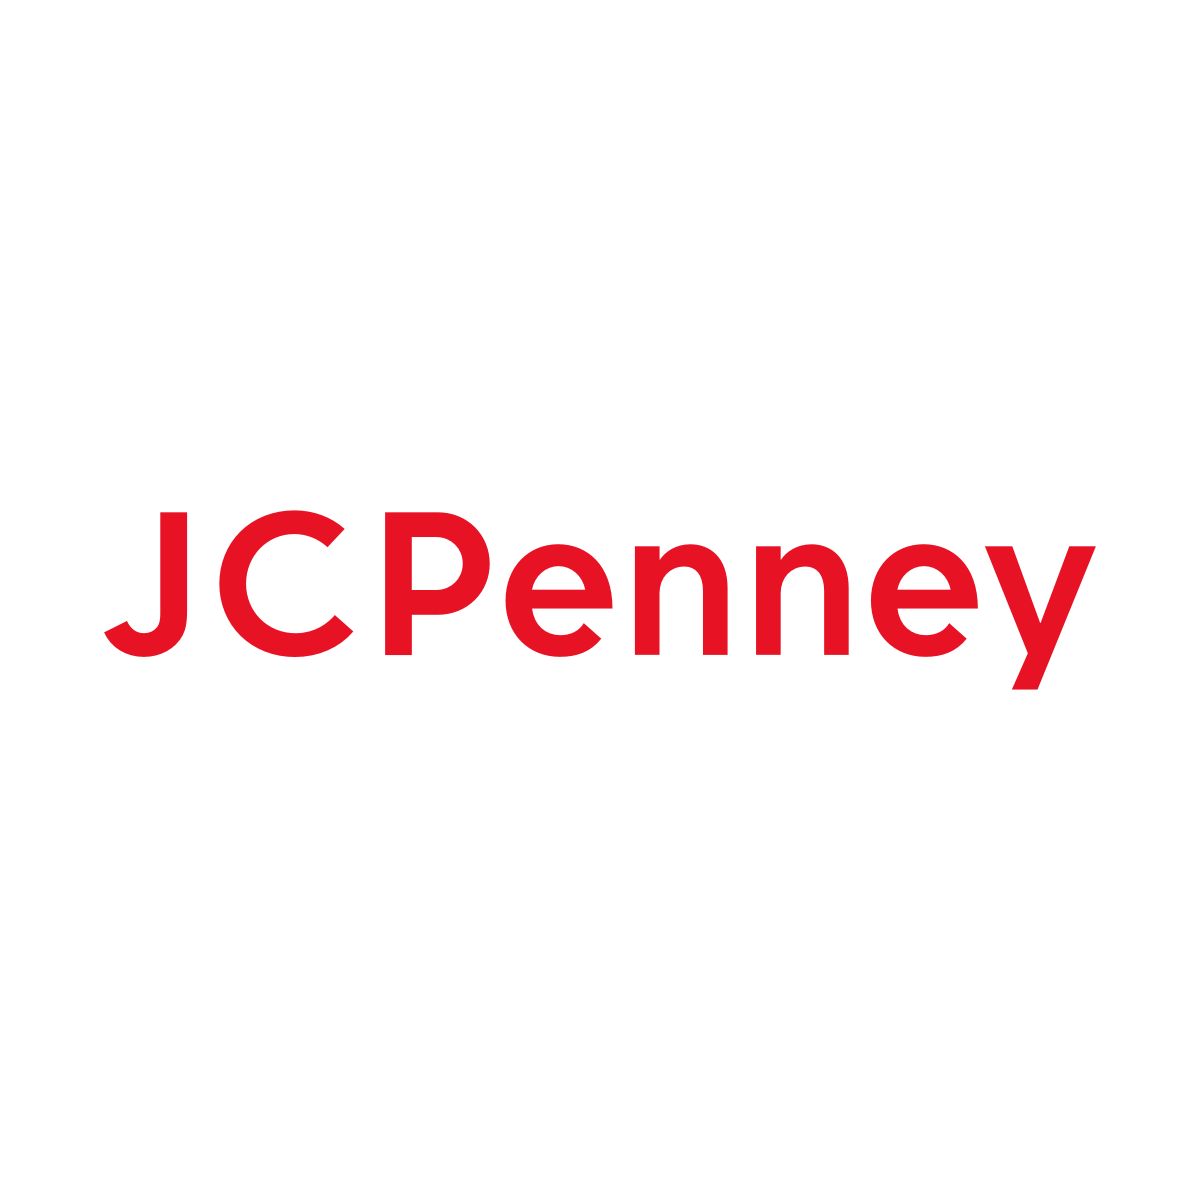 Hair Salon in Bismarck, ND | Haircuts & Color | JCPenney